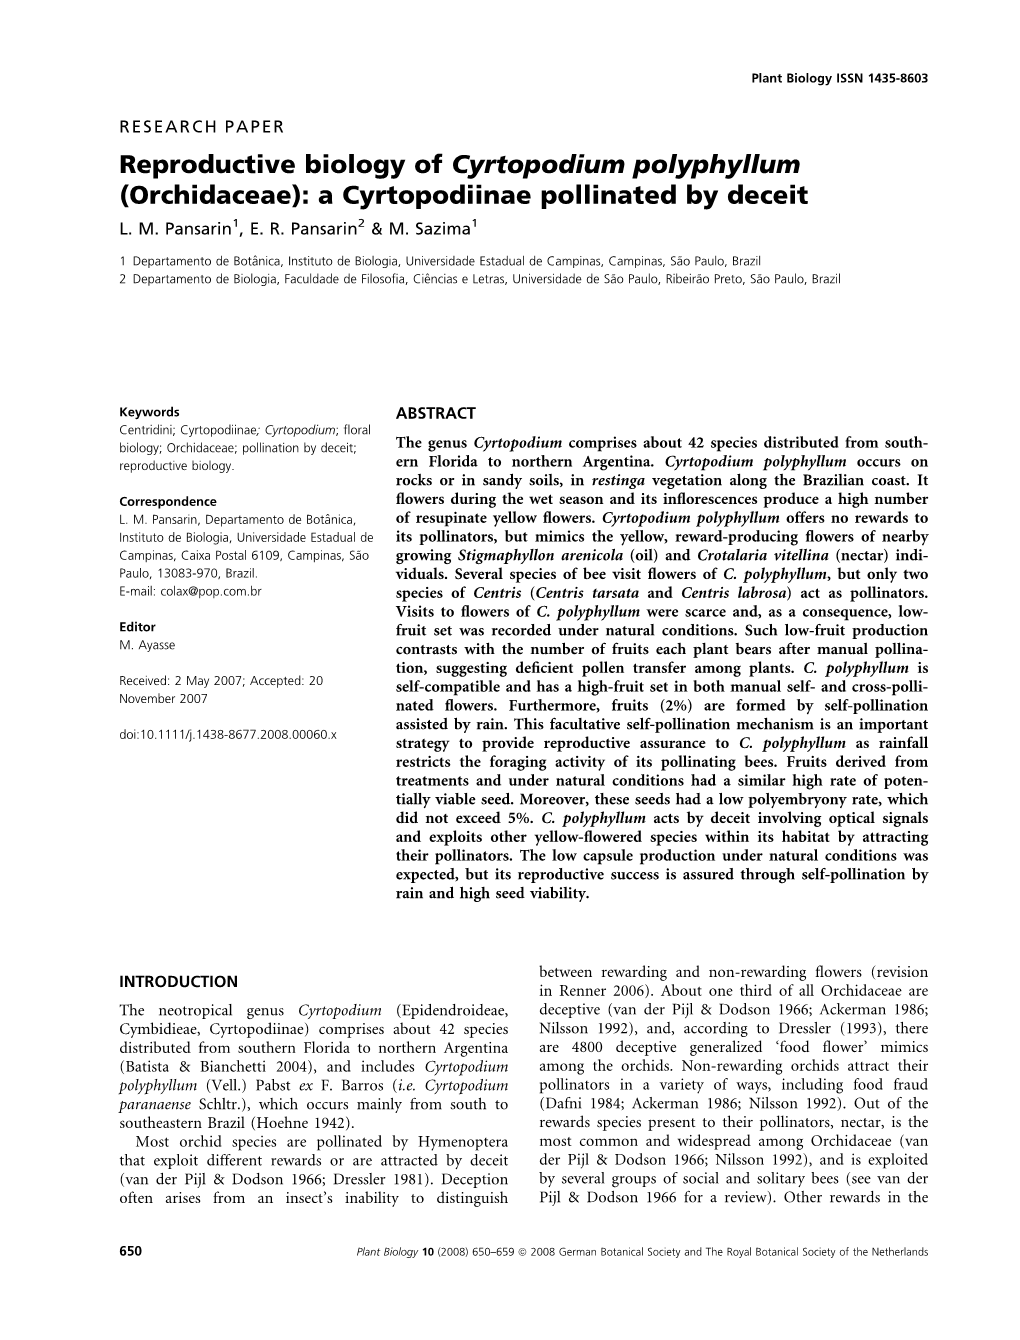 Reproductive Biology of Cyrtopodium Polyphyllum (Orchidaceae): a Cyrtopodiinae Pollinated by Deceit L